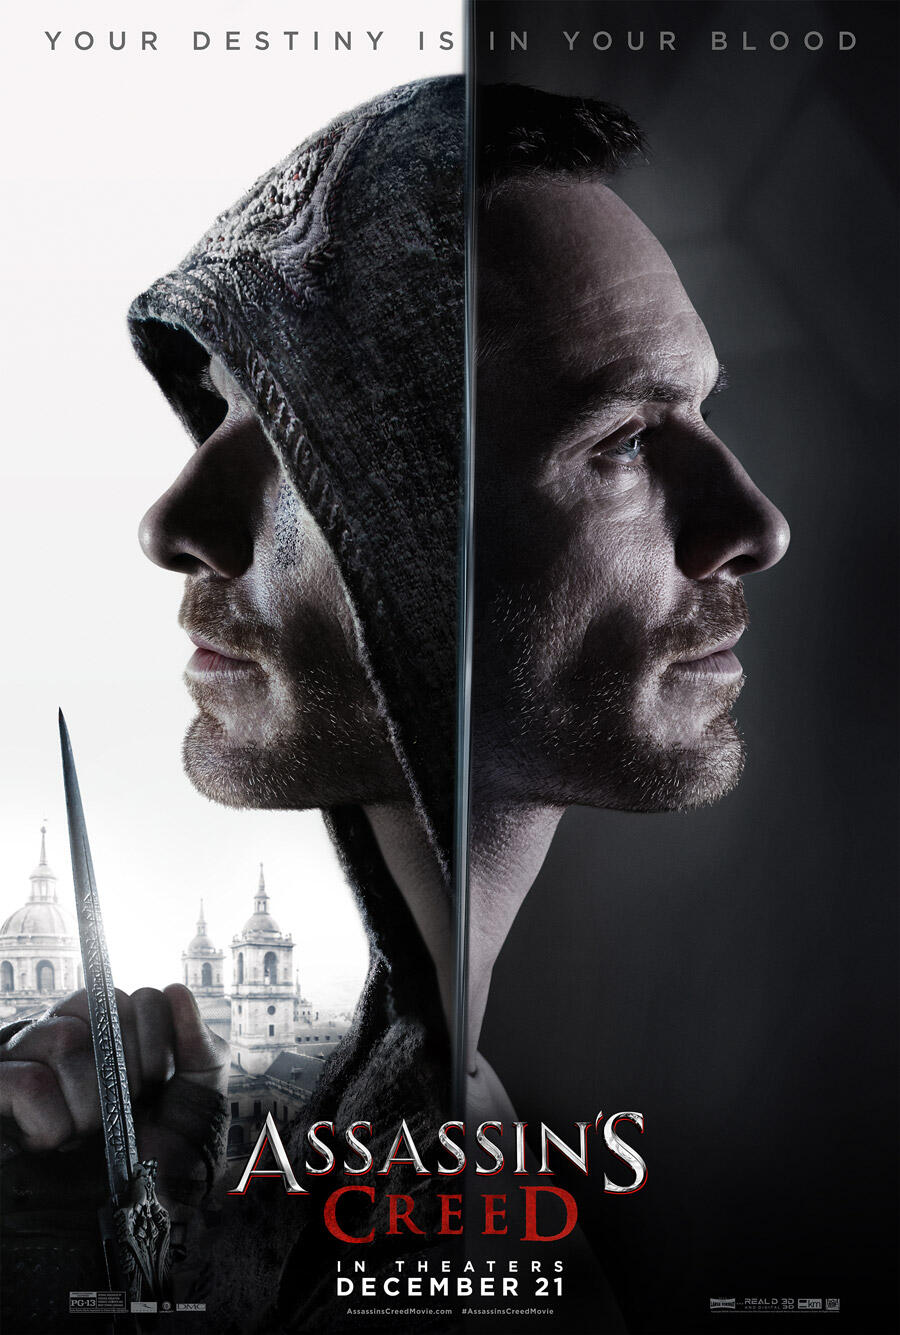 ASSASSIN'S CREED - IN CINEMAS NEW YEAR'S DAY 